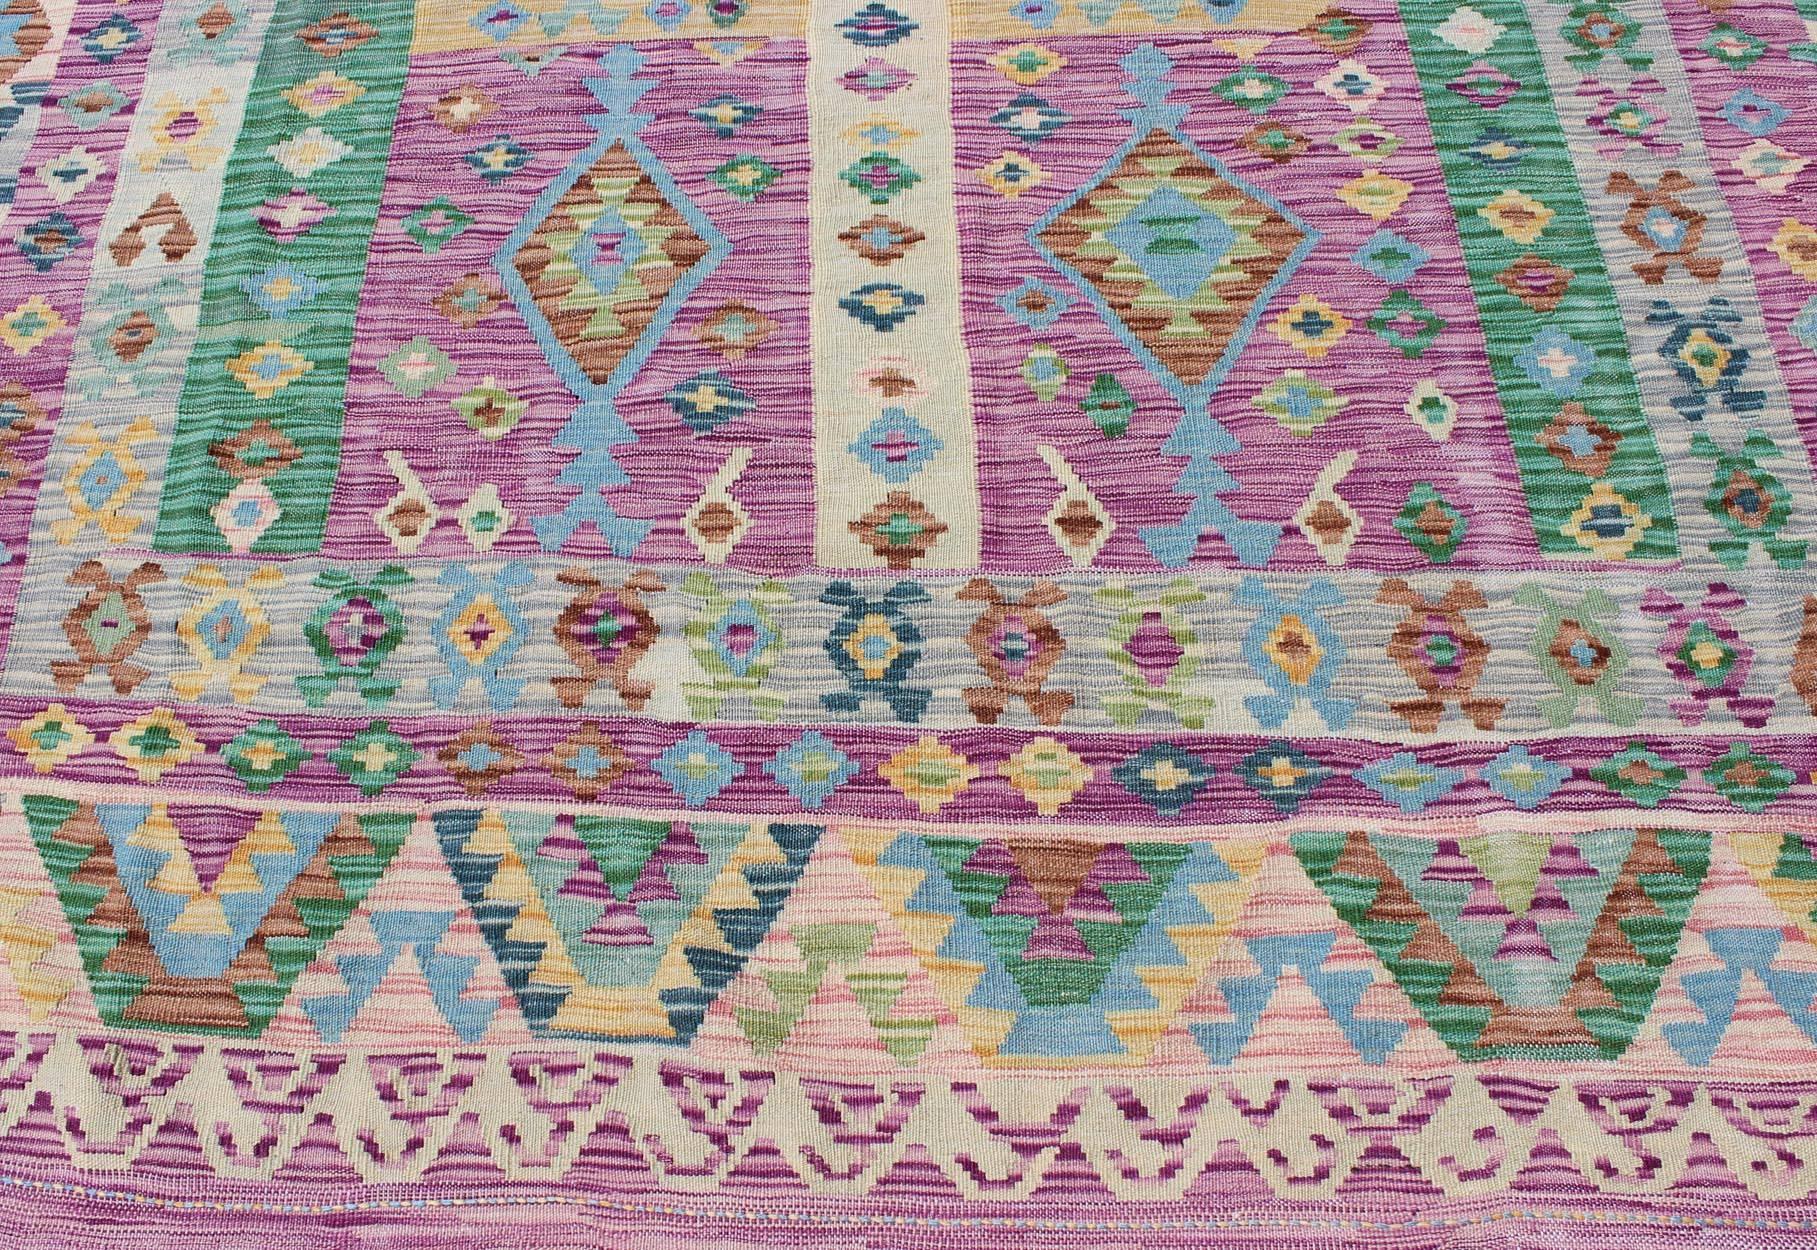 Contemporary Modern Afghan Flat Weave Kilim Rug in Purple, Lavender, Green, yellow and Cream 